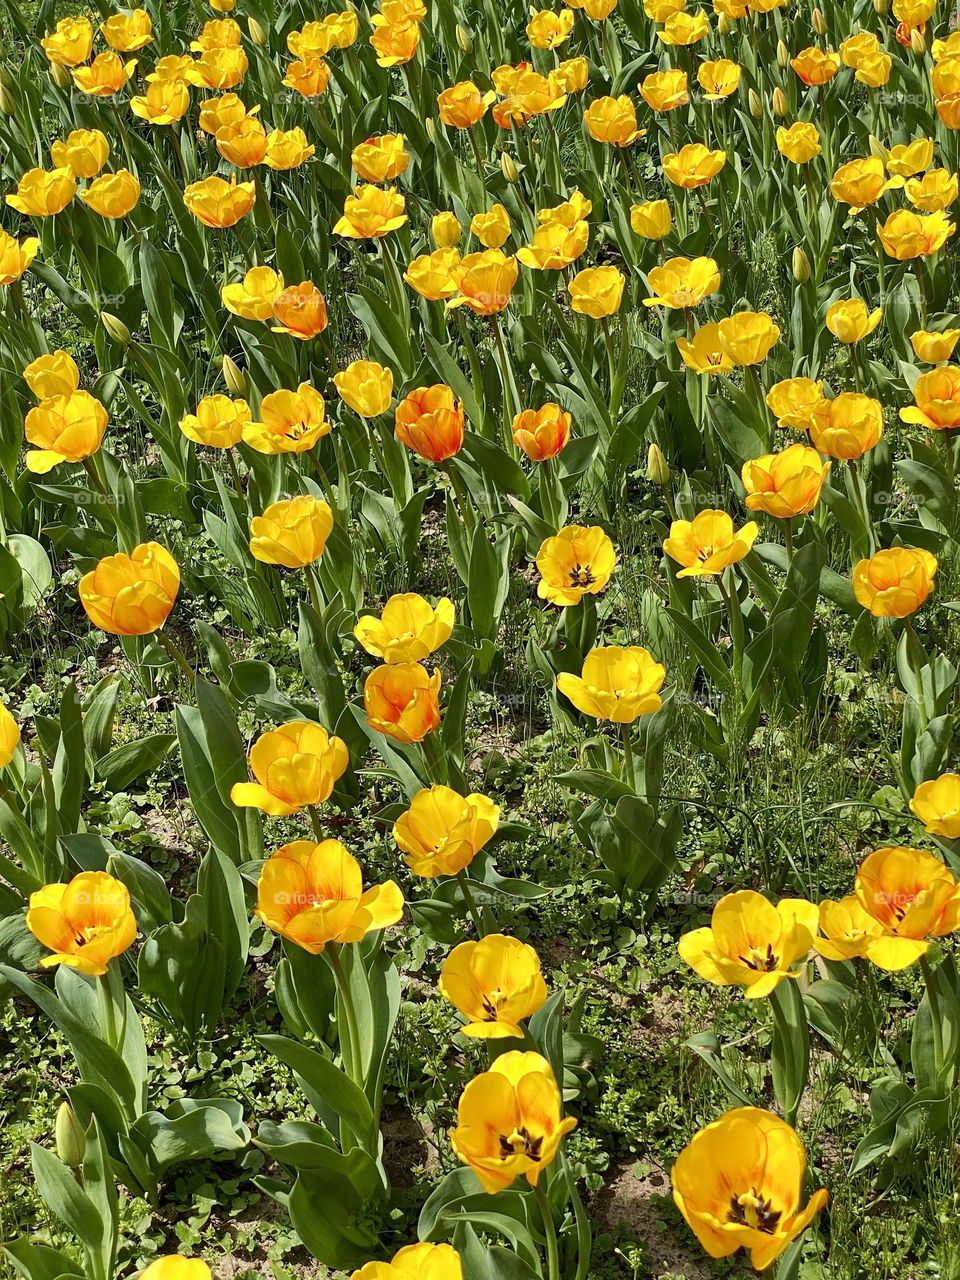 A field of bright yellow tulips